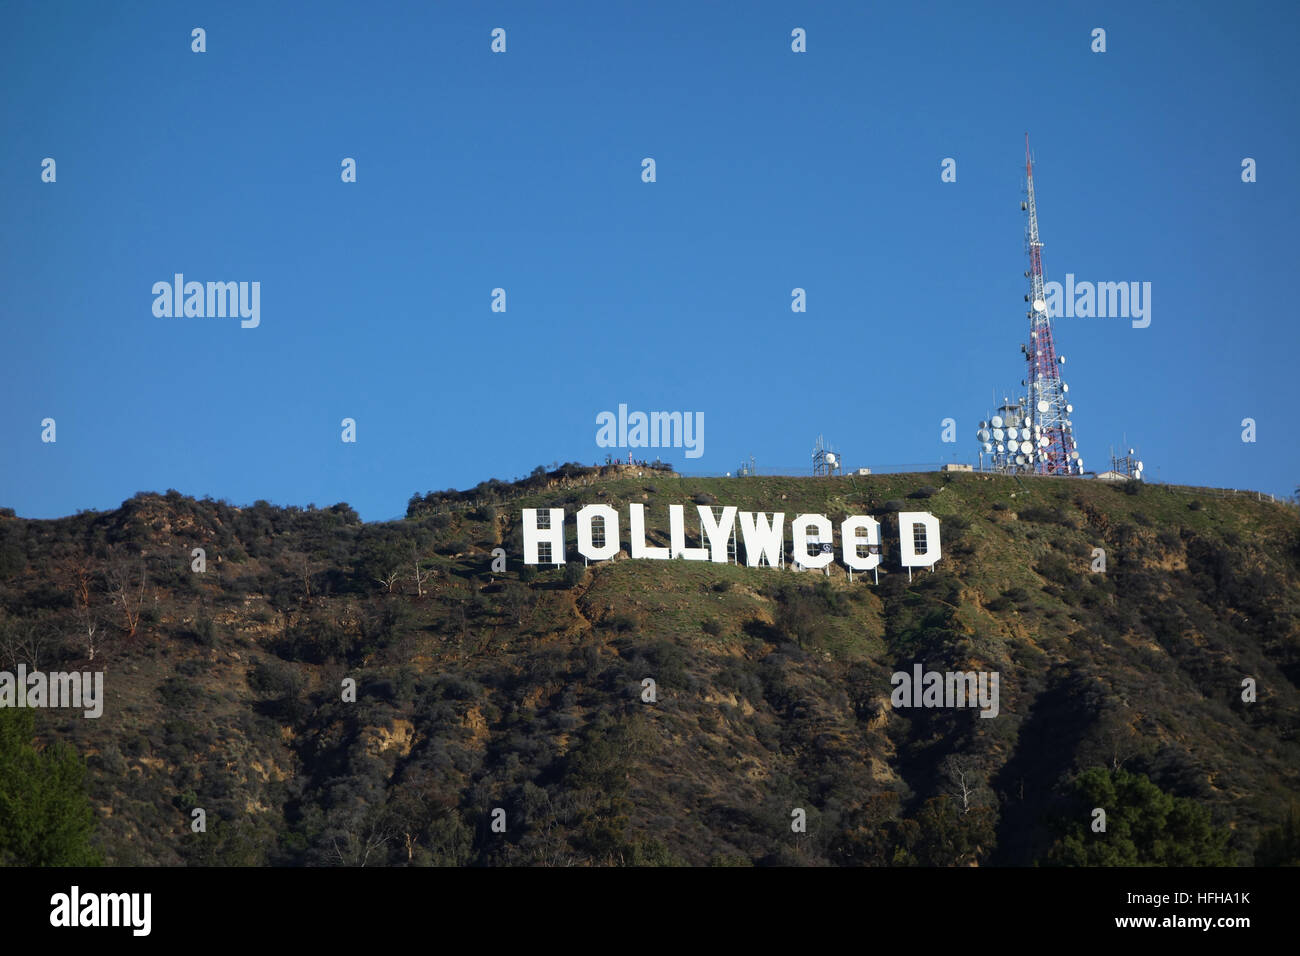 Hollywood, USA. 1st January 2017. The iconic Hollywood Sign was altered by pranksters to read 'Hollyweed'.  Residents nearby the sign awoke to this view on New Year's Day. The iconic sign was similarly altered once before on Jan. 1, 1976. Credit: Robert Landau/Alamy Live News Stock Photo